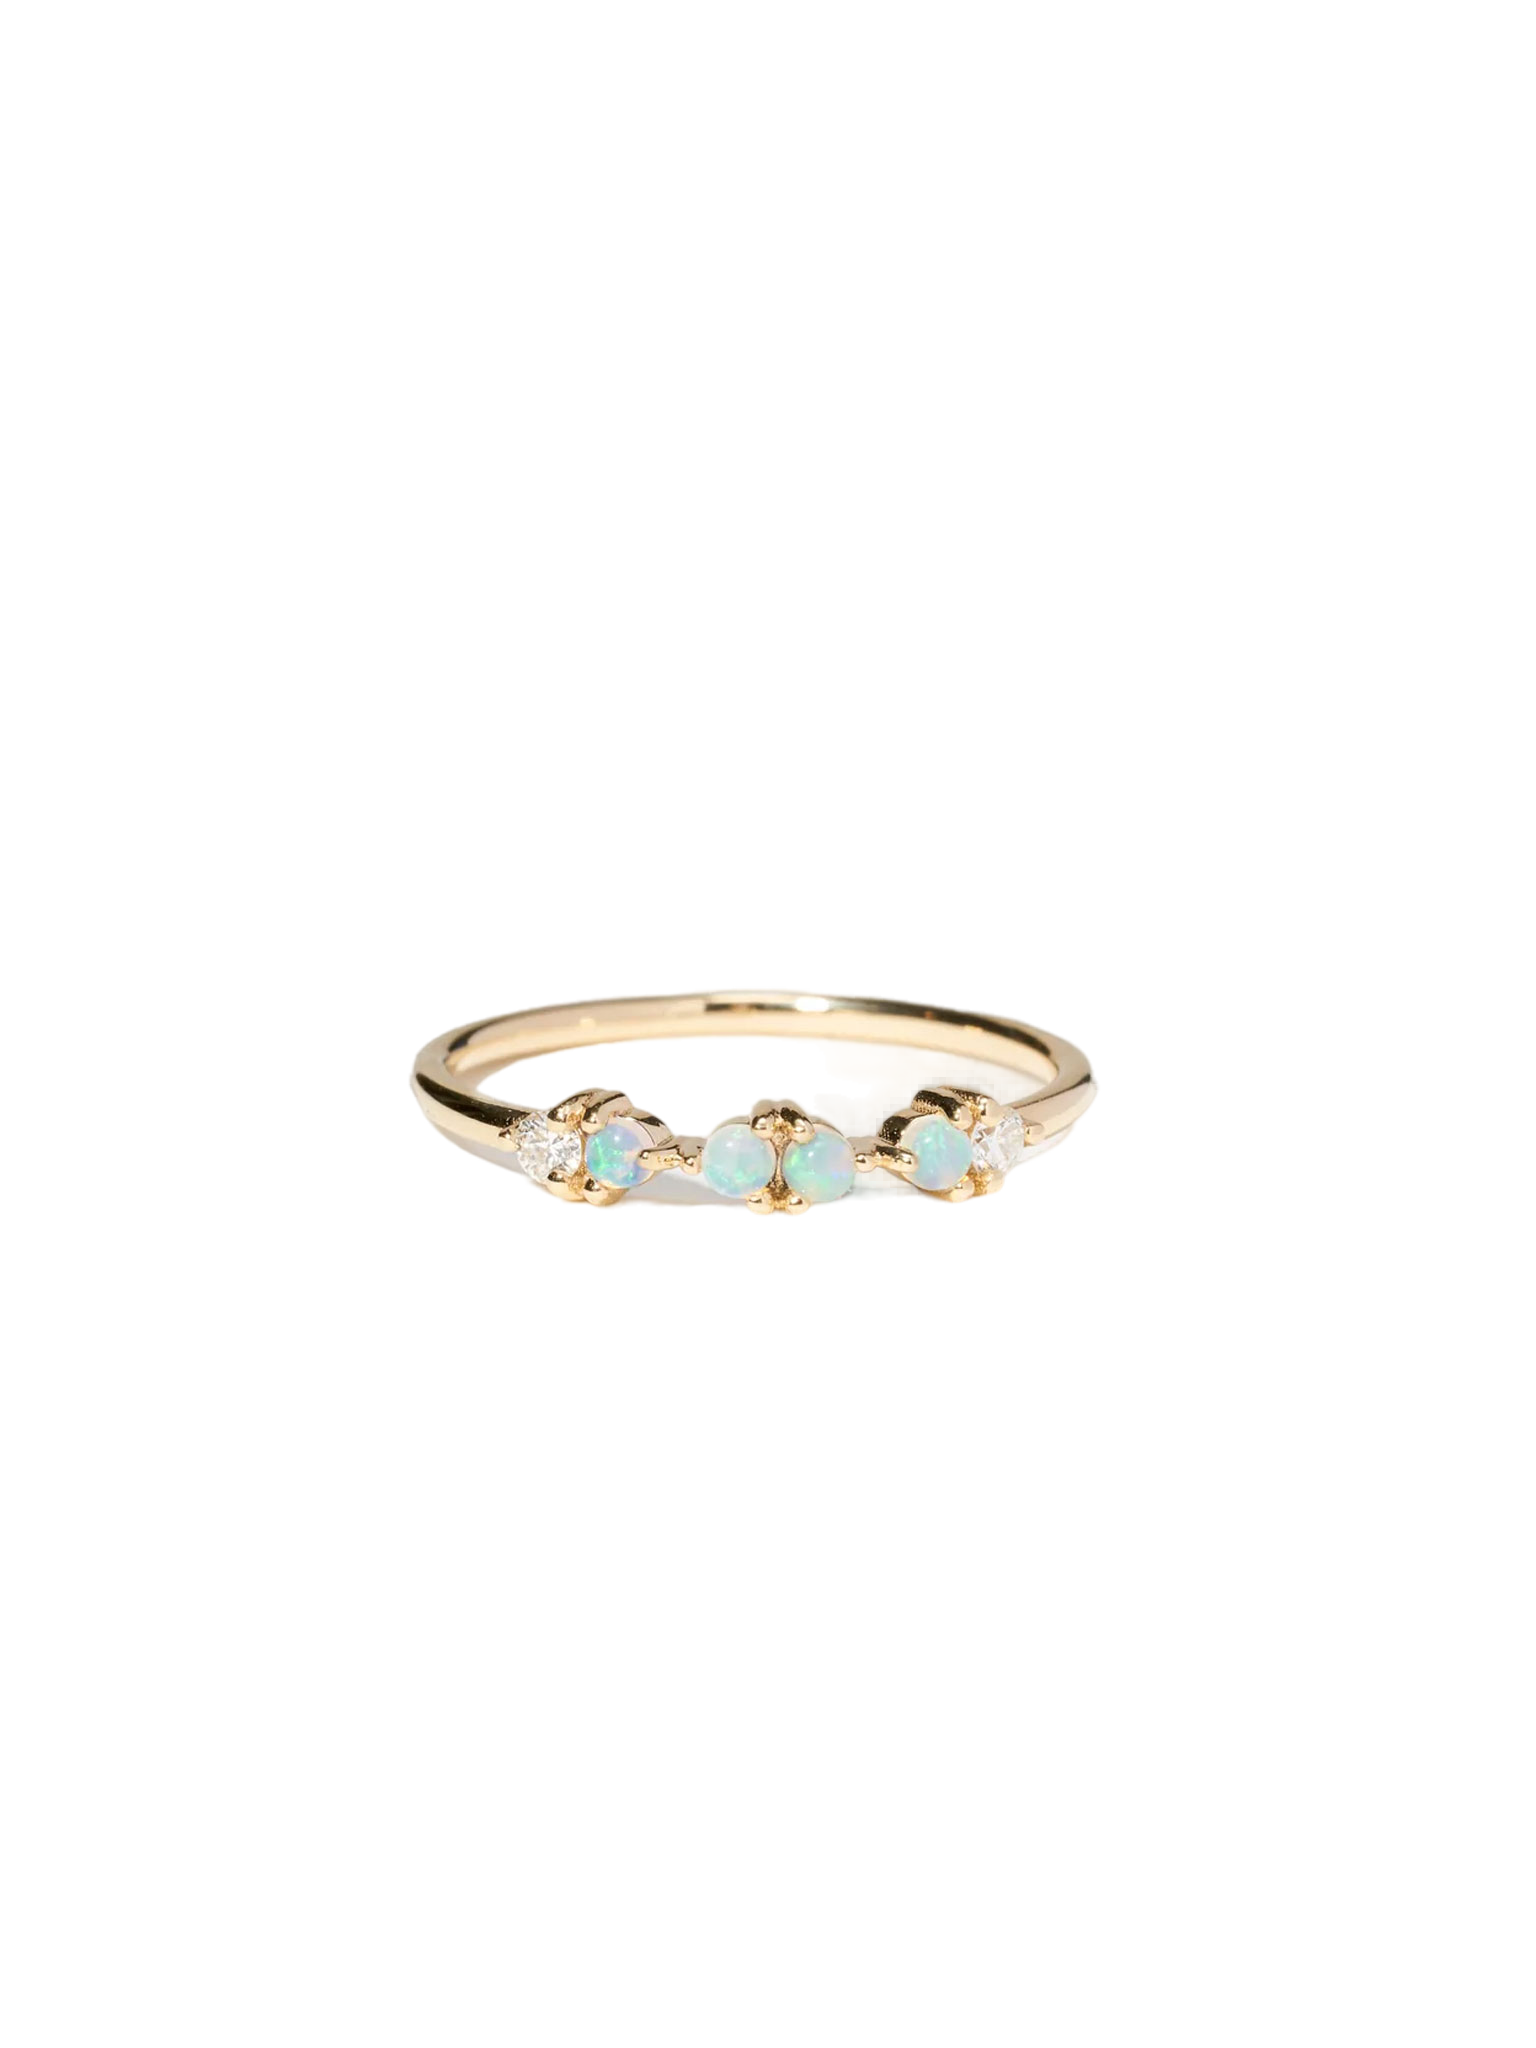 Opal and diamond demi-paired ring